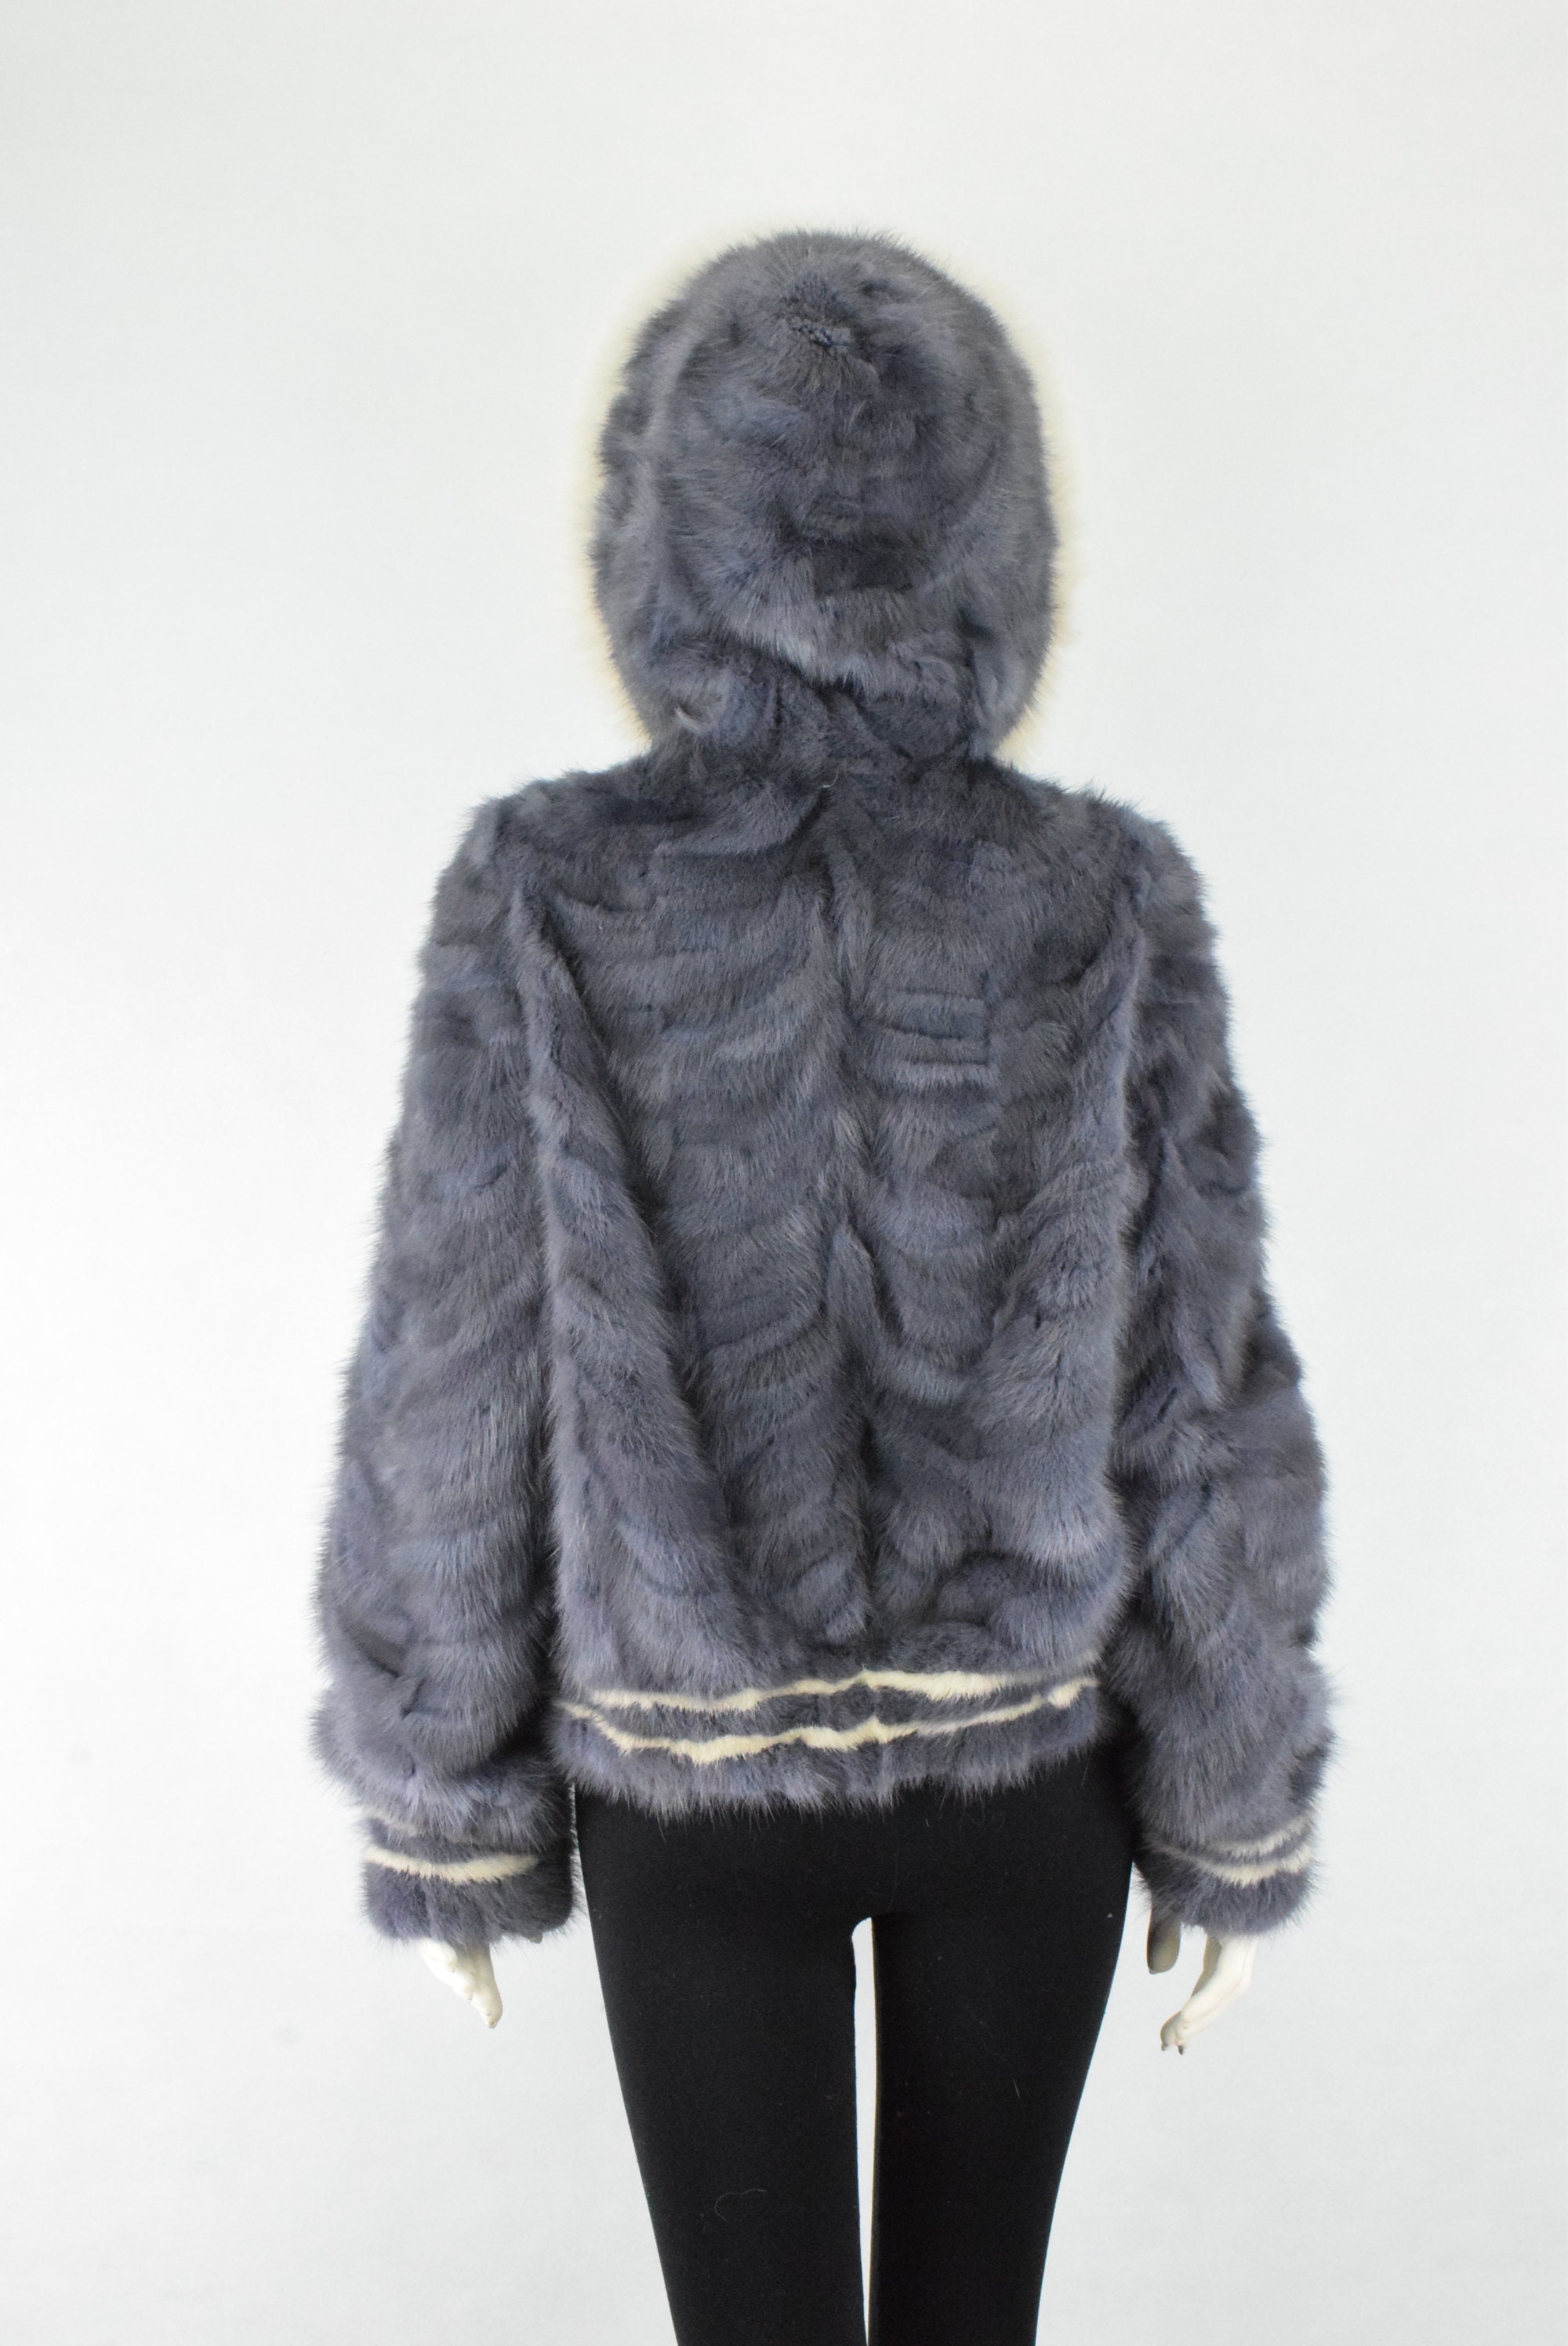 Real Fur Mink Bomber Jacket Style With Fox Trim on Hood Gray - Etsy